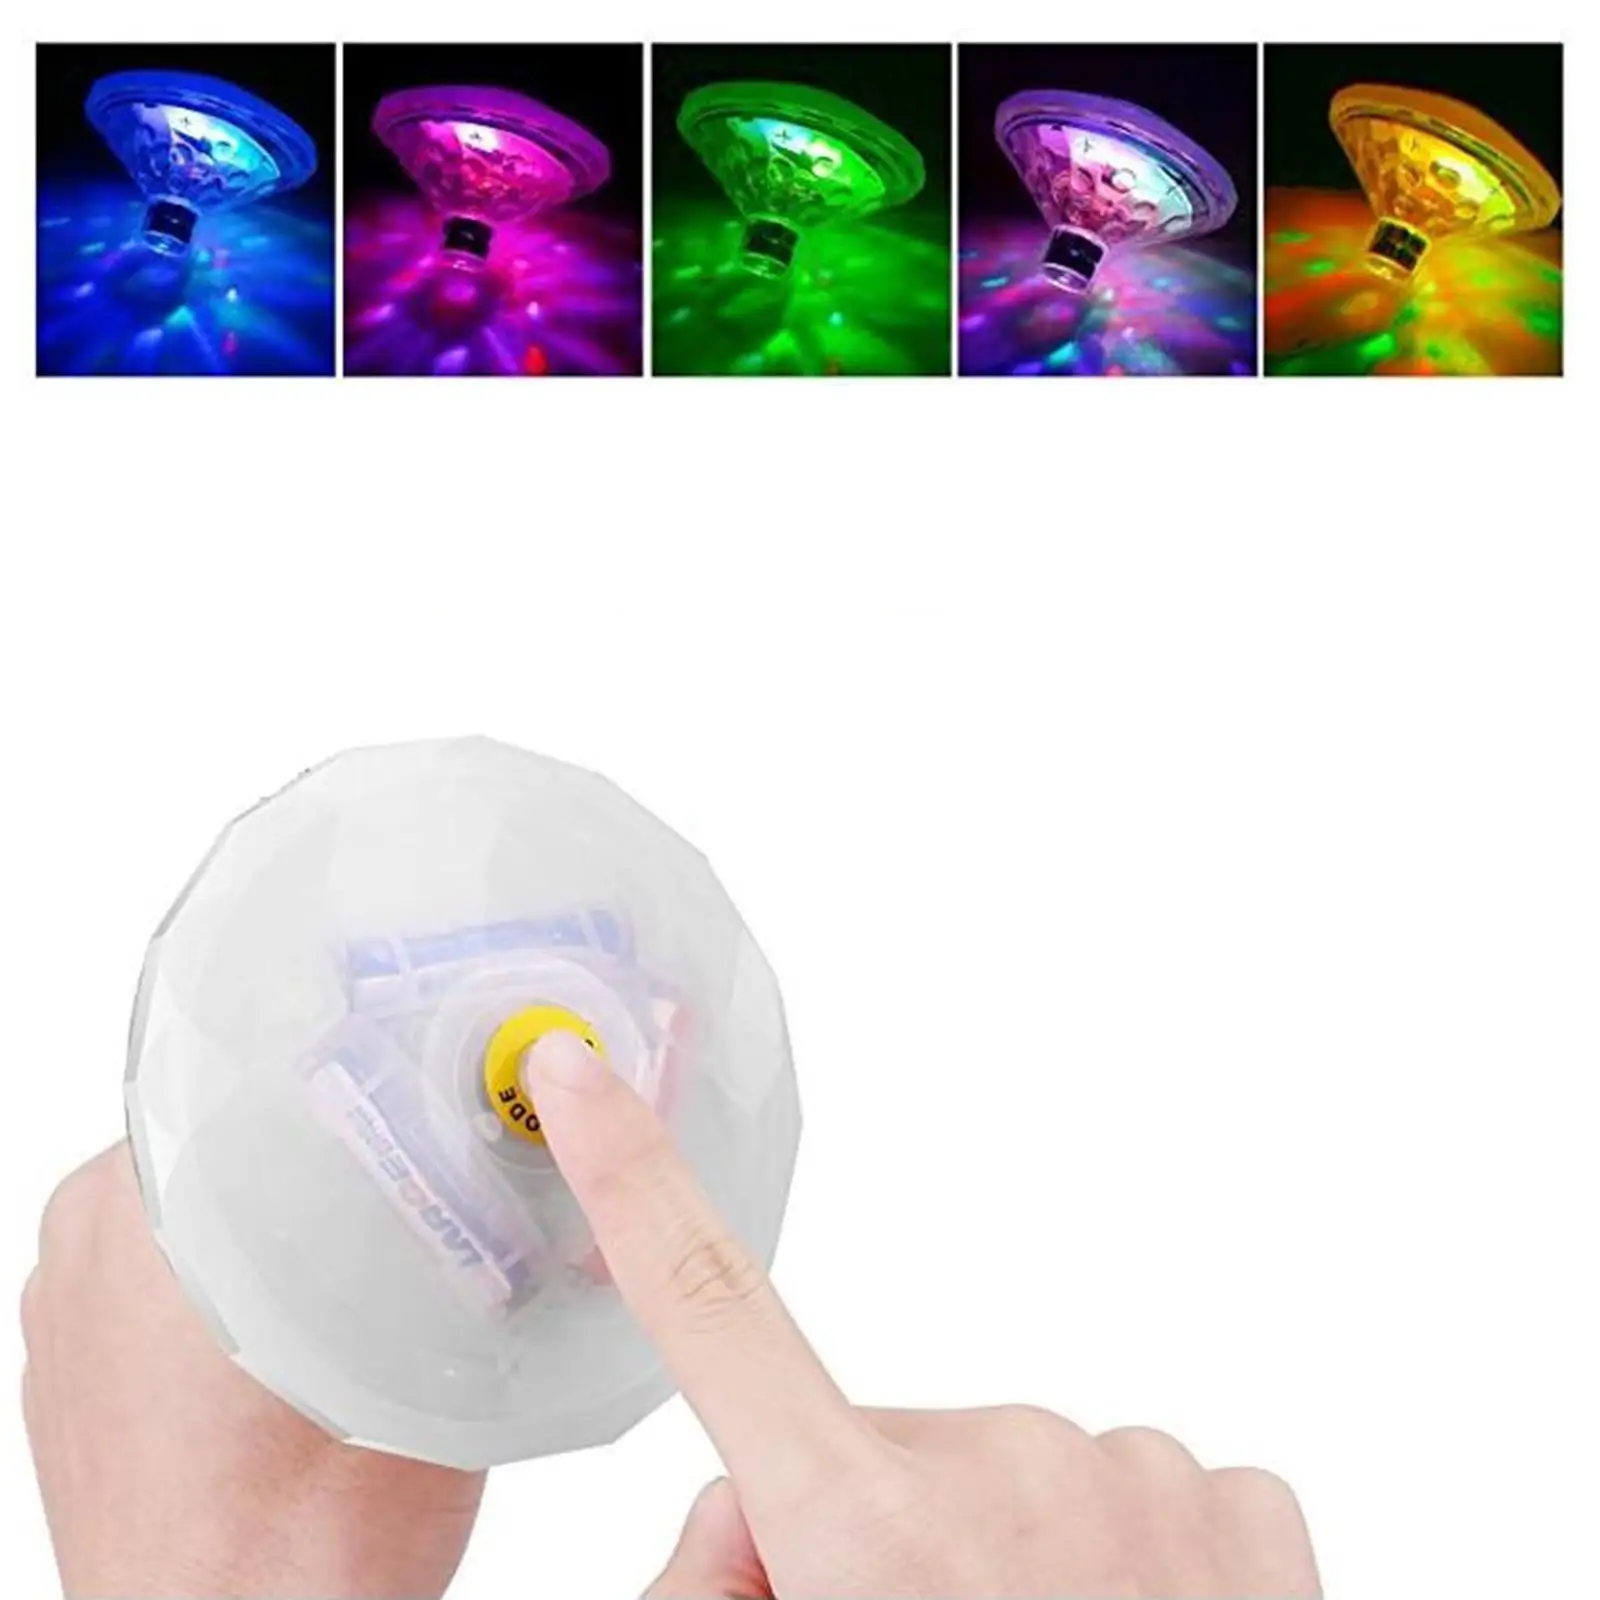 Floating LED pool lamp Pond Lamp Submersible Lights for Fountain Decoration